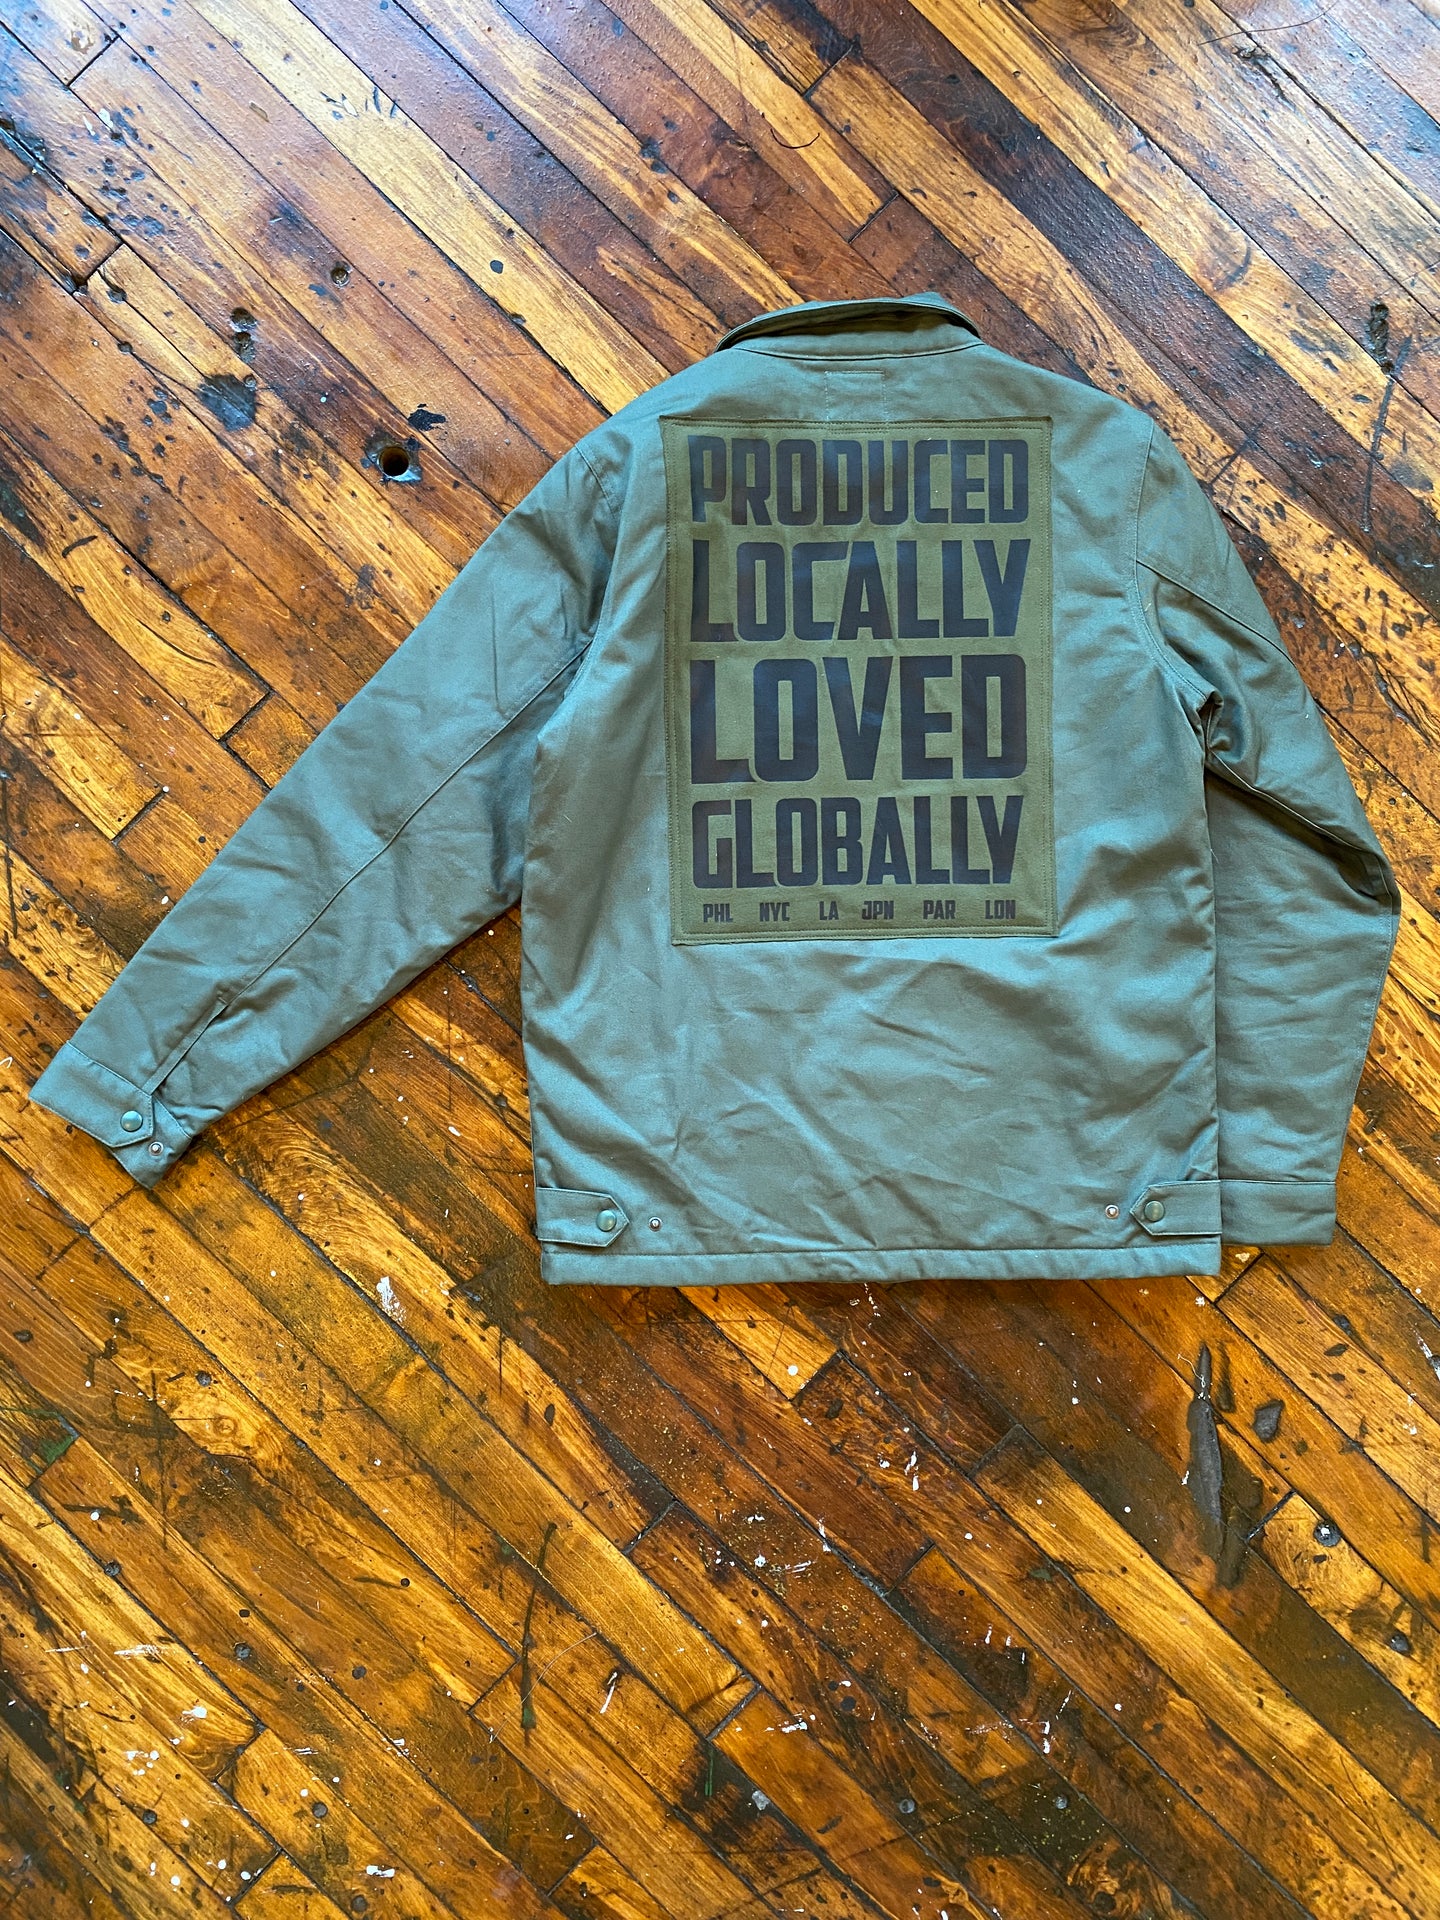 Local / global service jacket